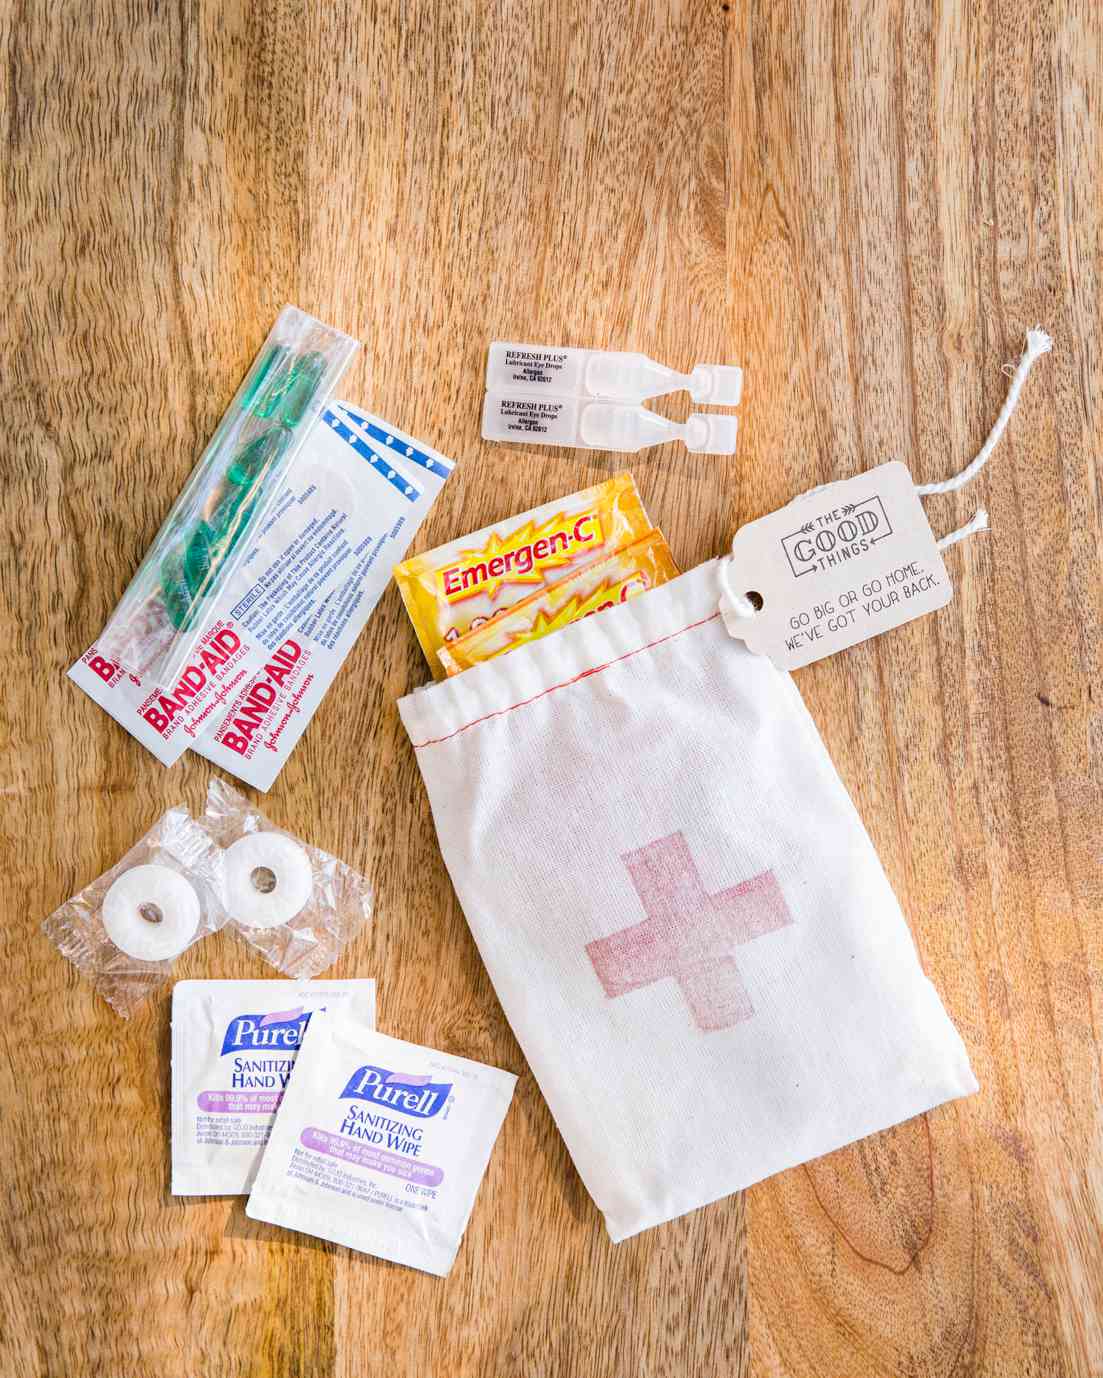 Build an Emergency Kit for Guests